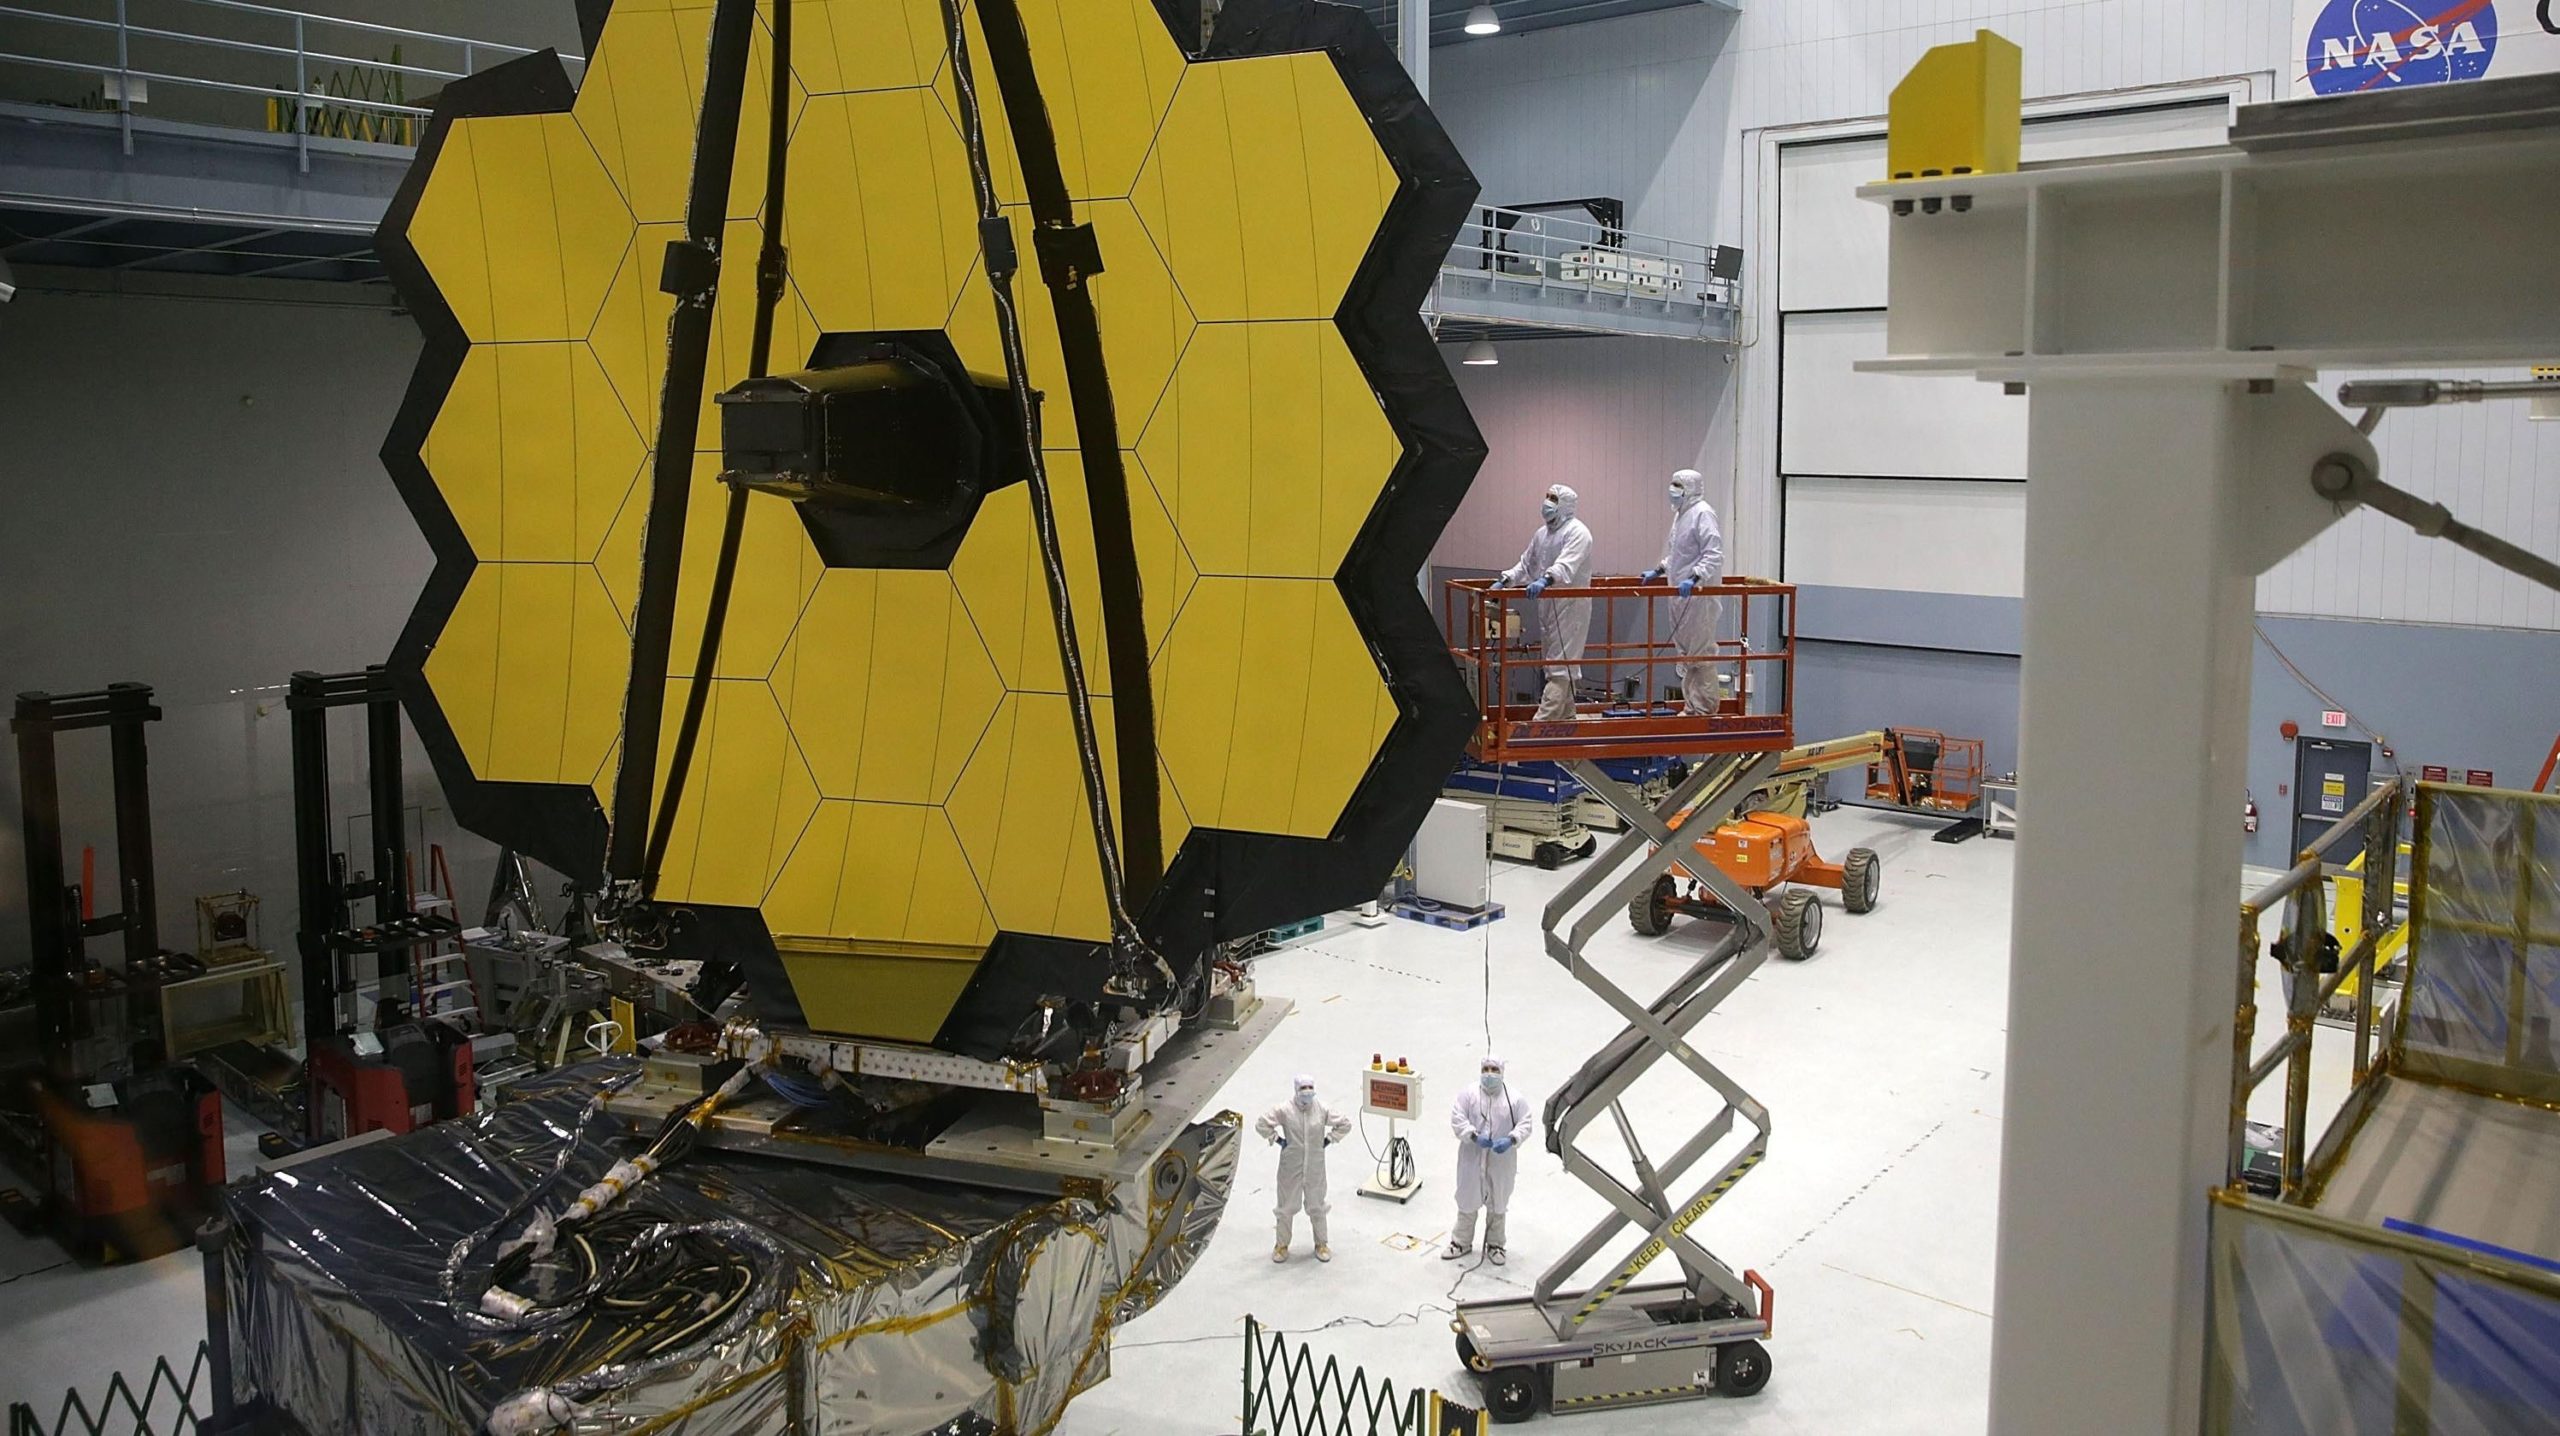 How to Watch the Launch of the James Webb Space Telescope (and Why It’s Big Deal)